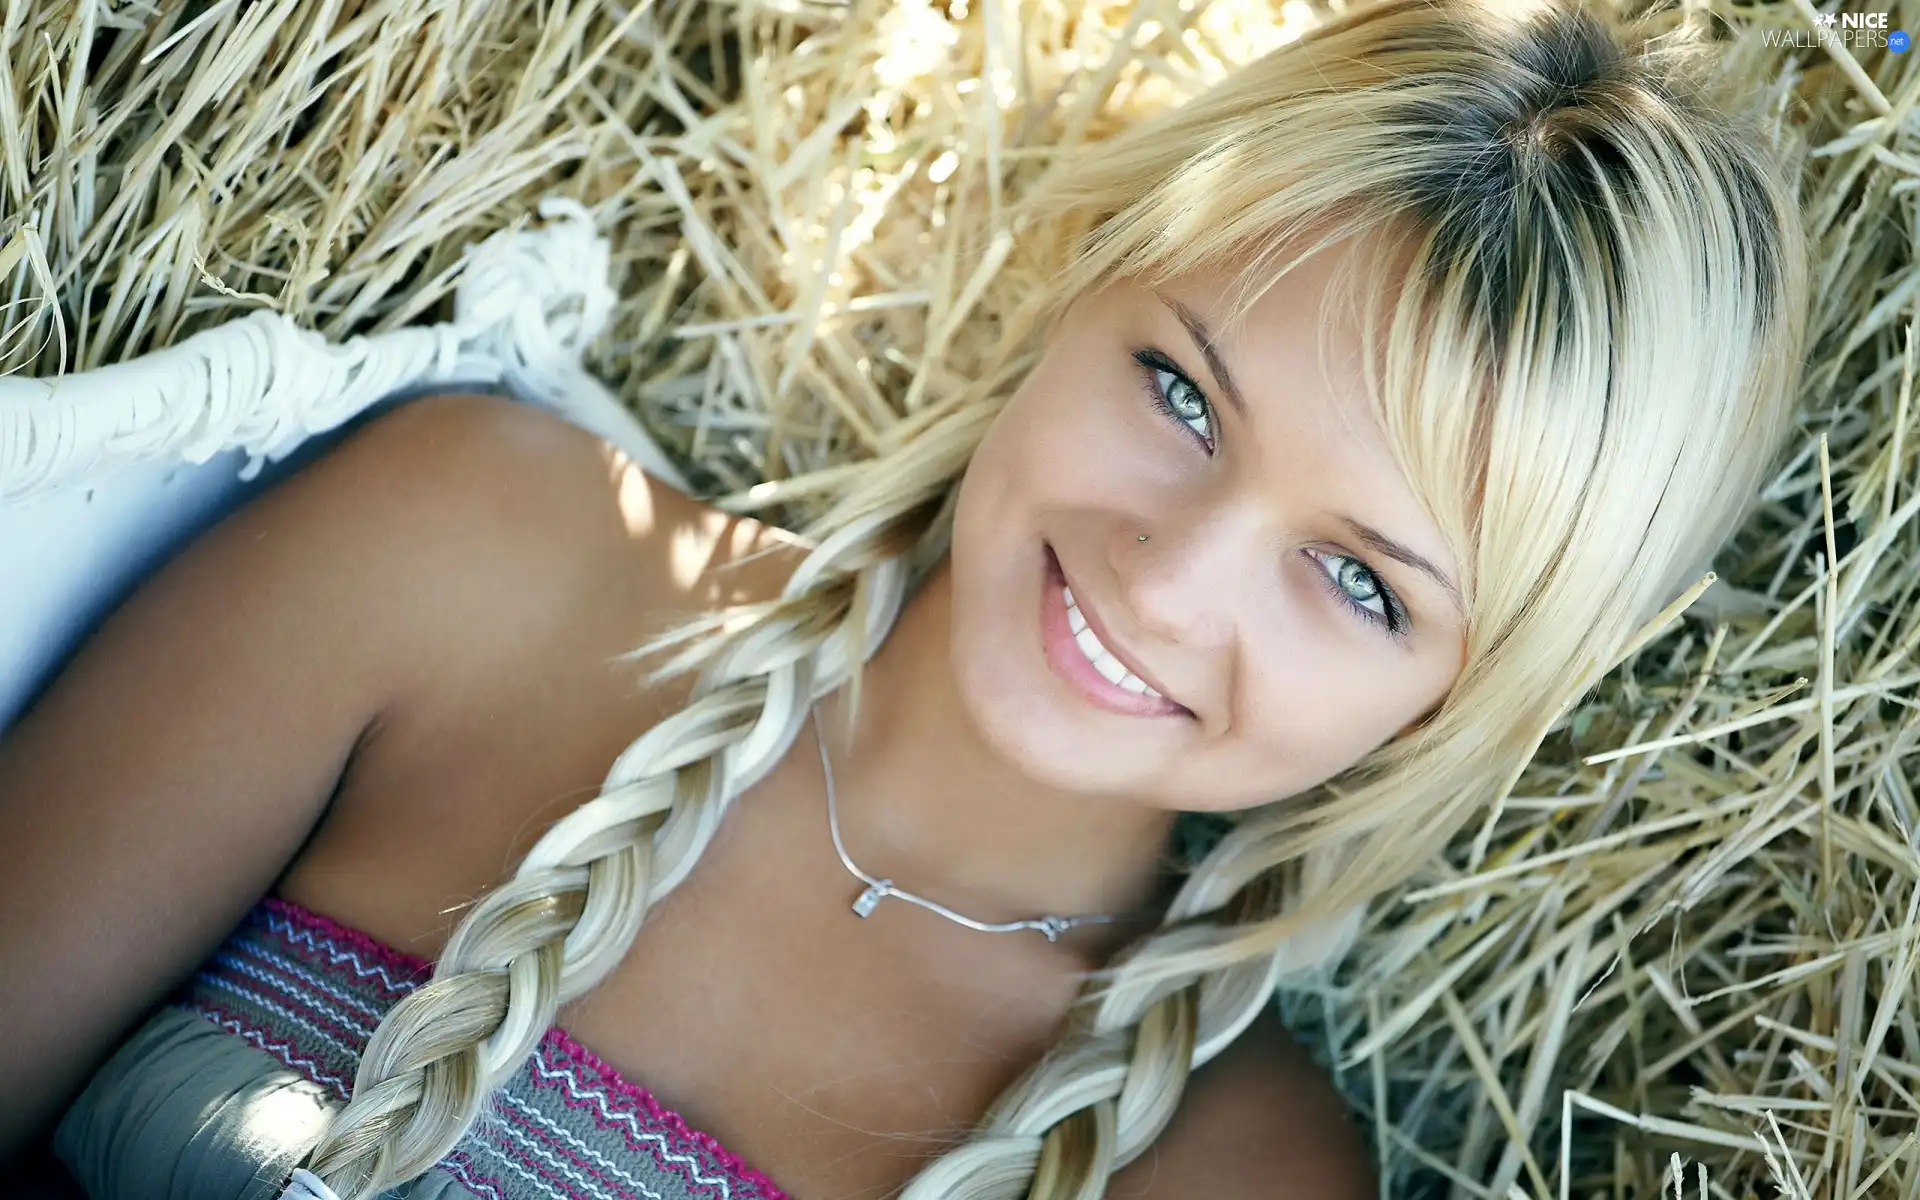 pigtail, smiling, Blond